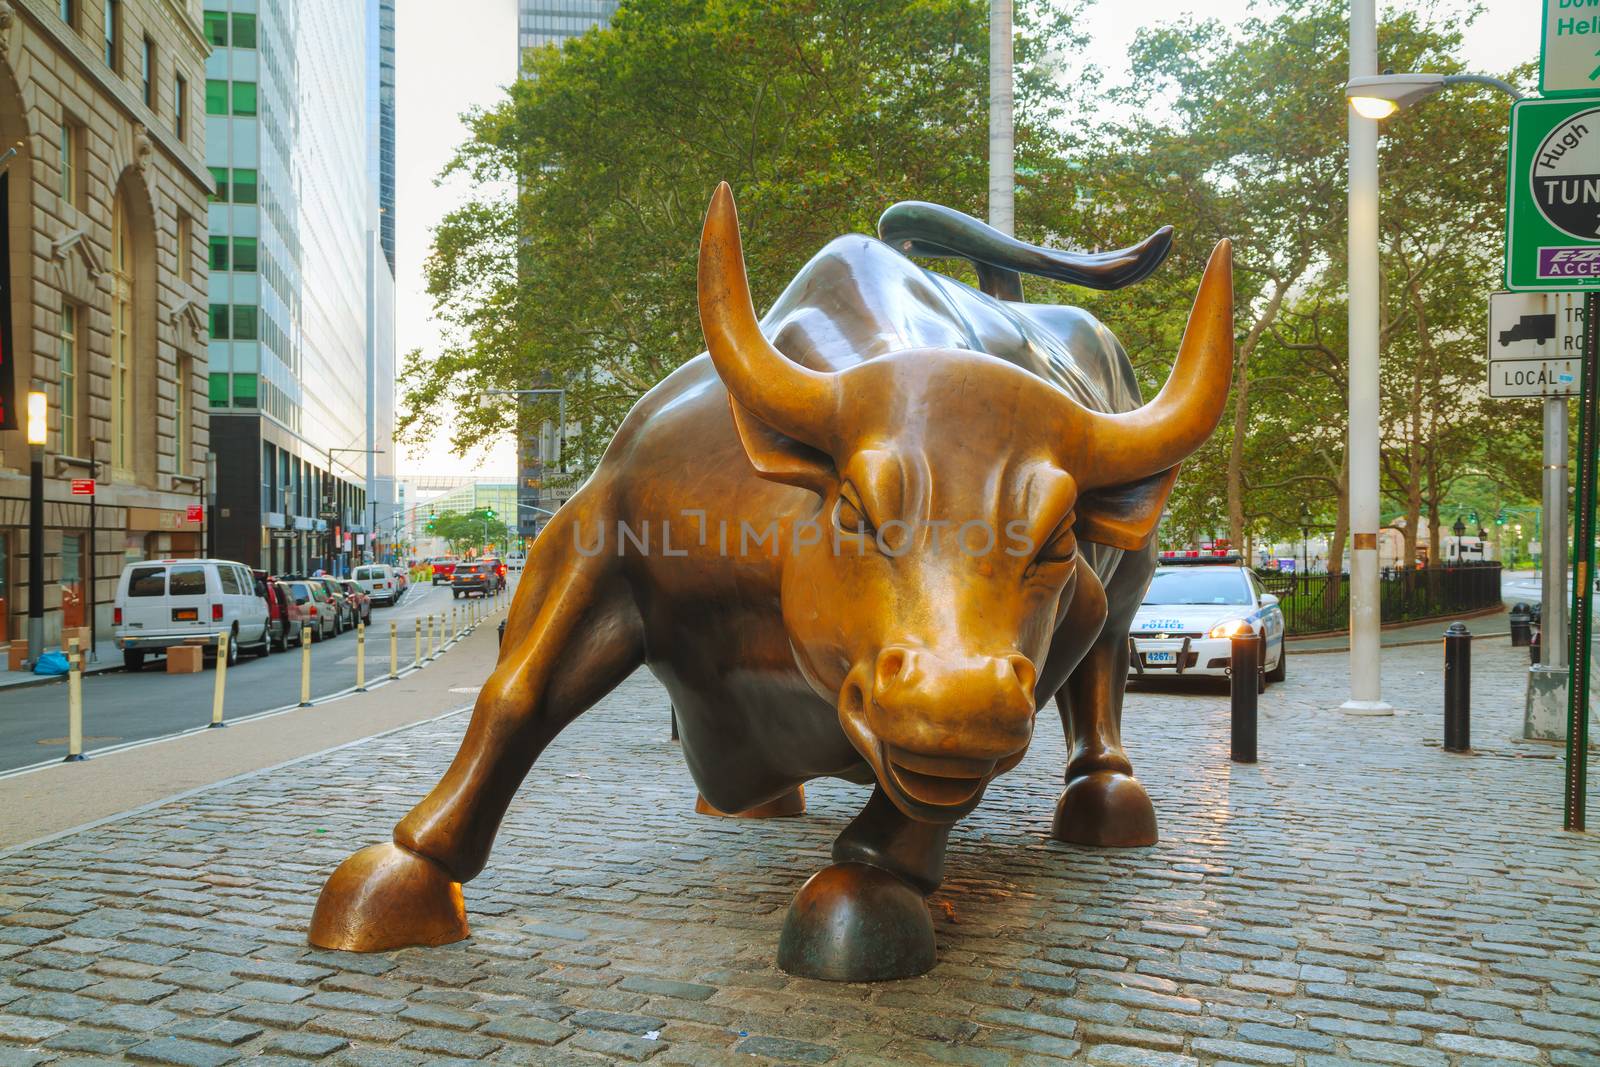 Charging Bull sculpture in New York City by AndreyKr